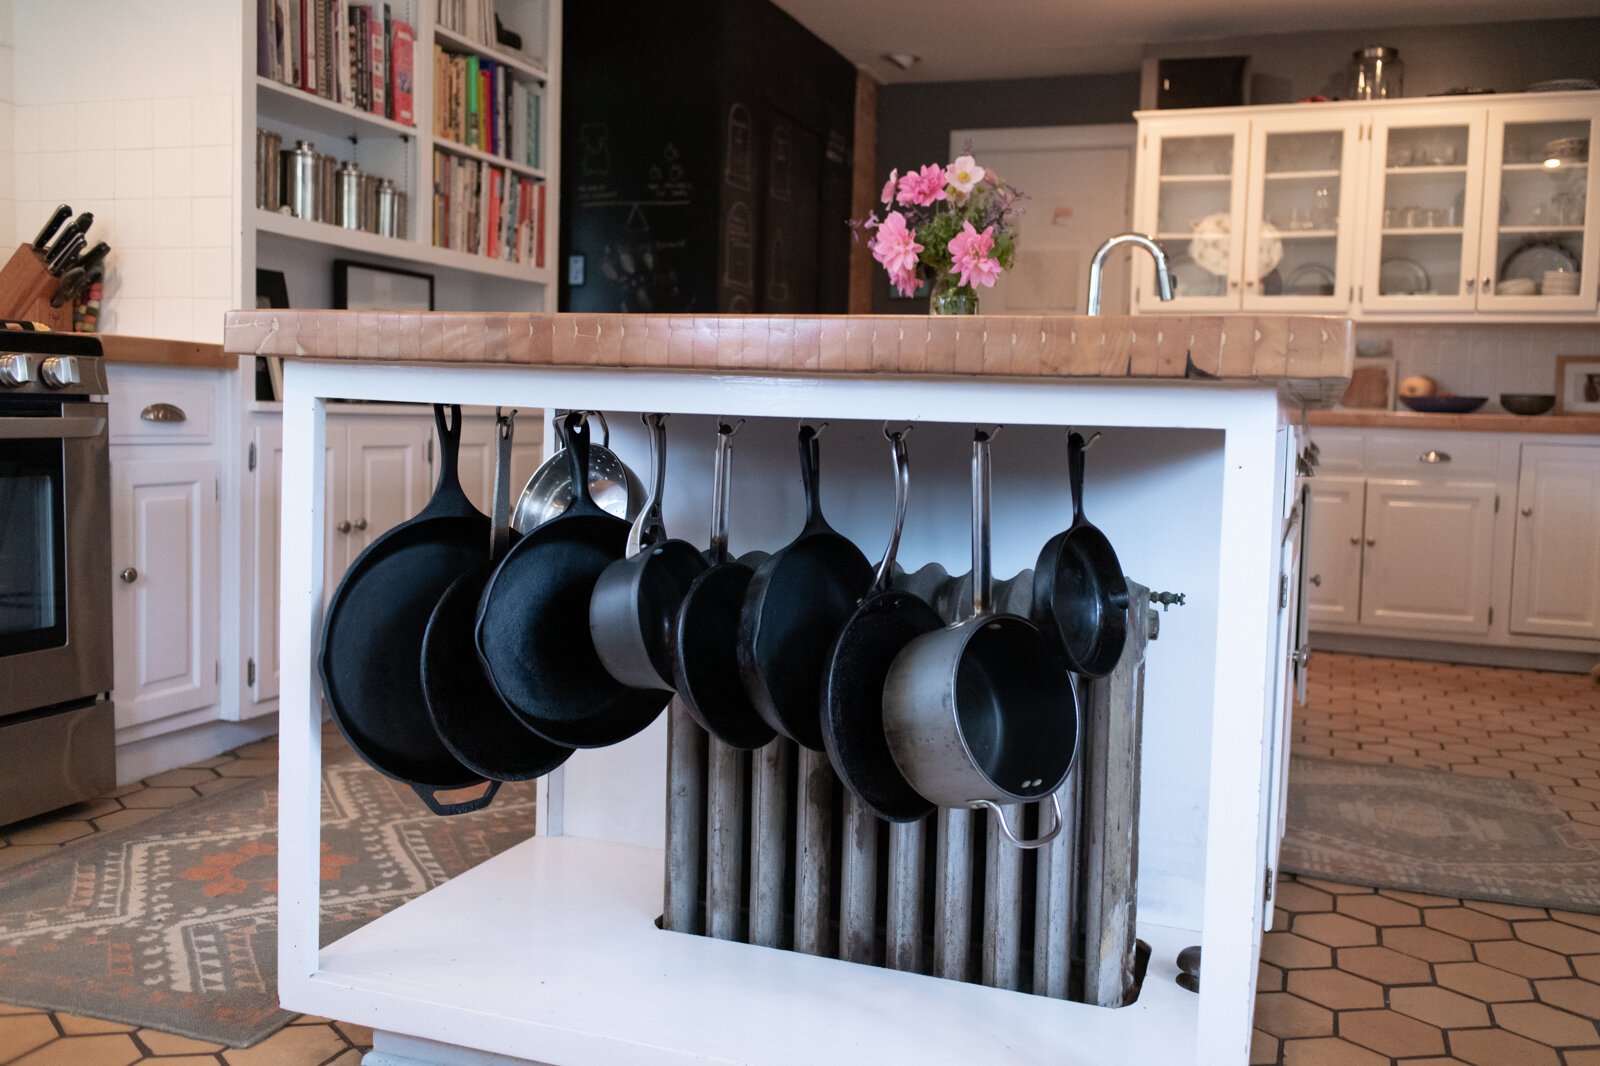 Creative pot and pan storage in the kitchen.